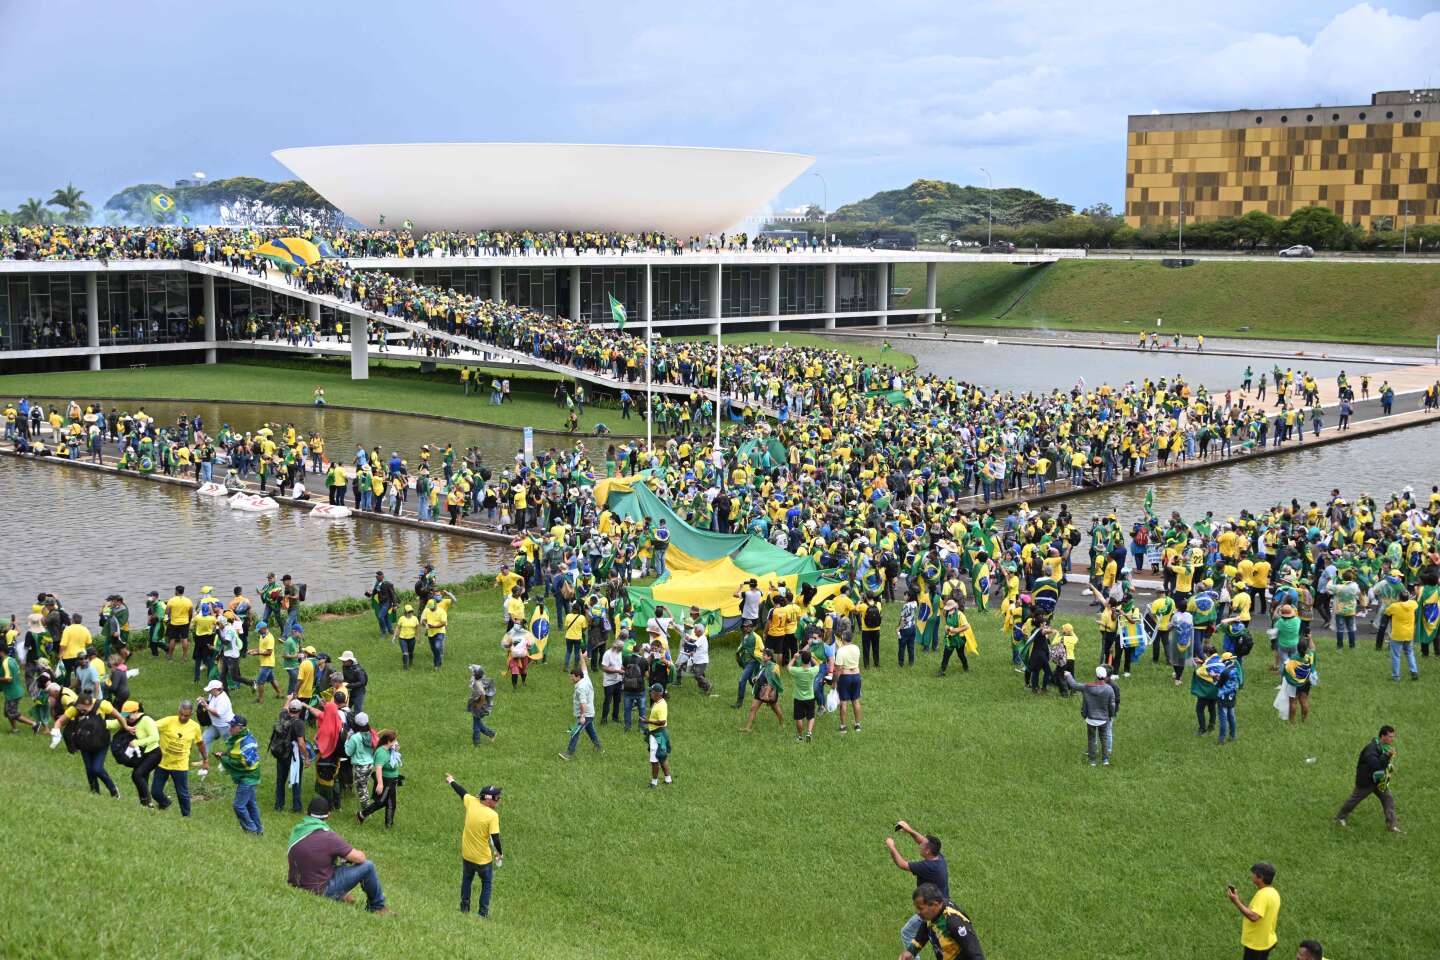 In Brazil, hundreds of Bolsonaro supporters stormed Congress and the presidential palace